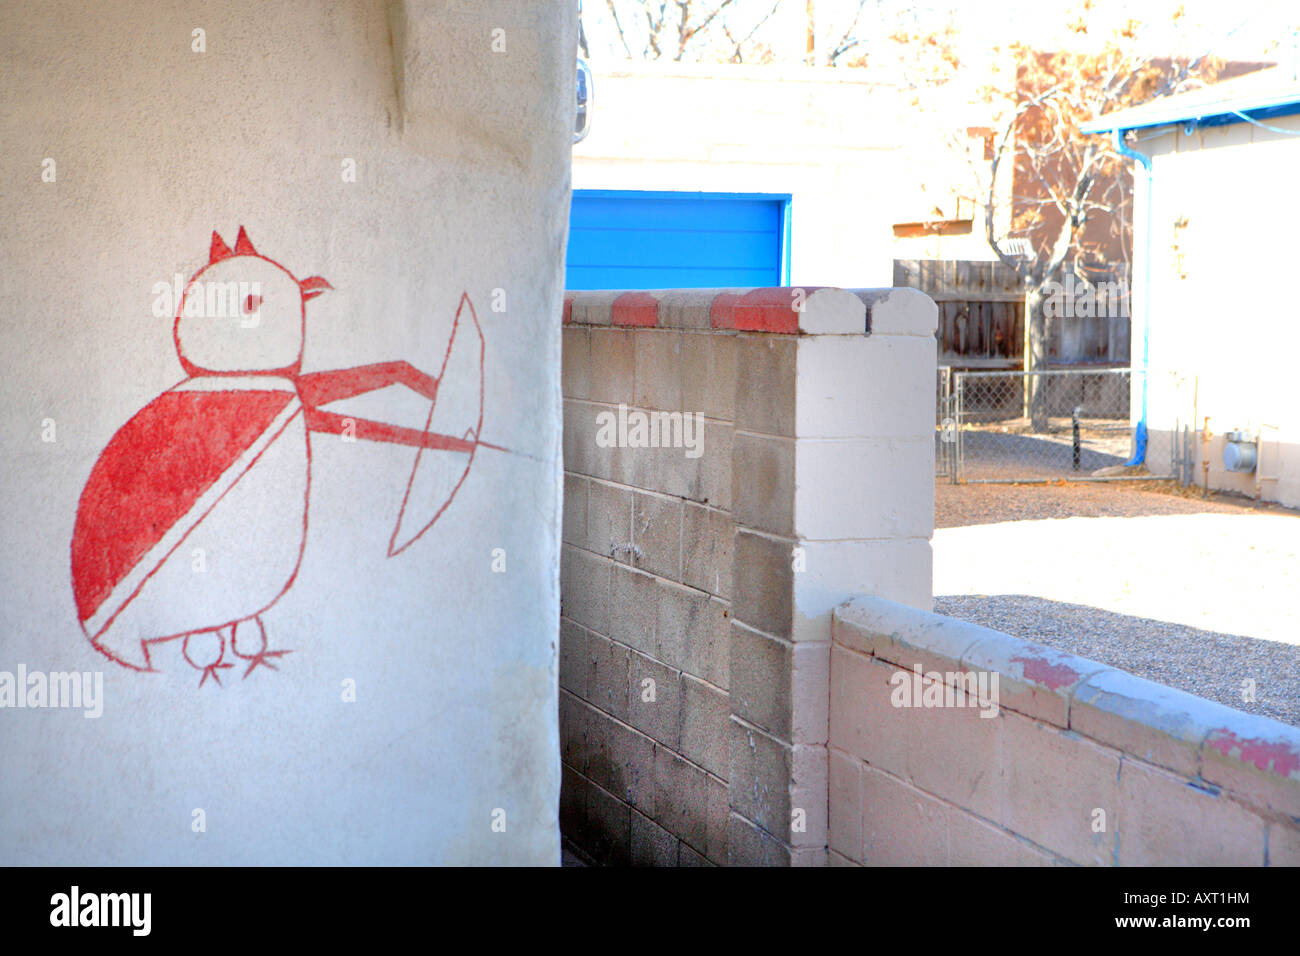 DRAWING ON A BUILDING WALL NEAR OLD TOWN PLAZA IN ALBUQUERQUE NEW MEXICO USA Stock Photo